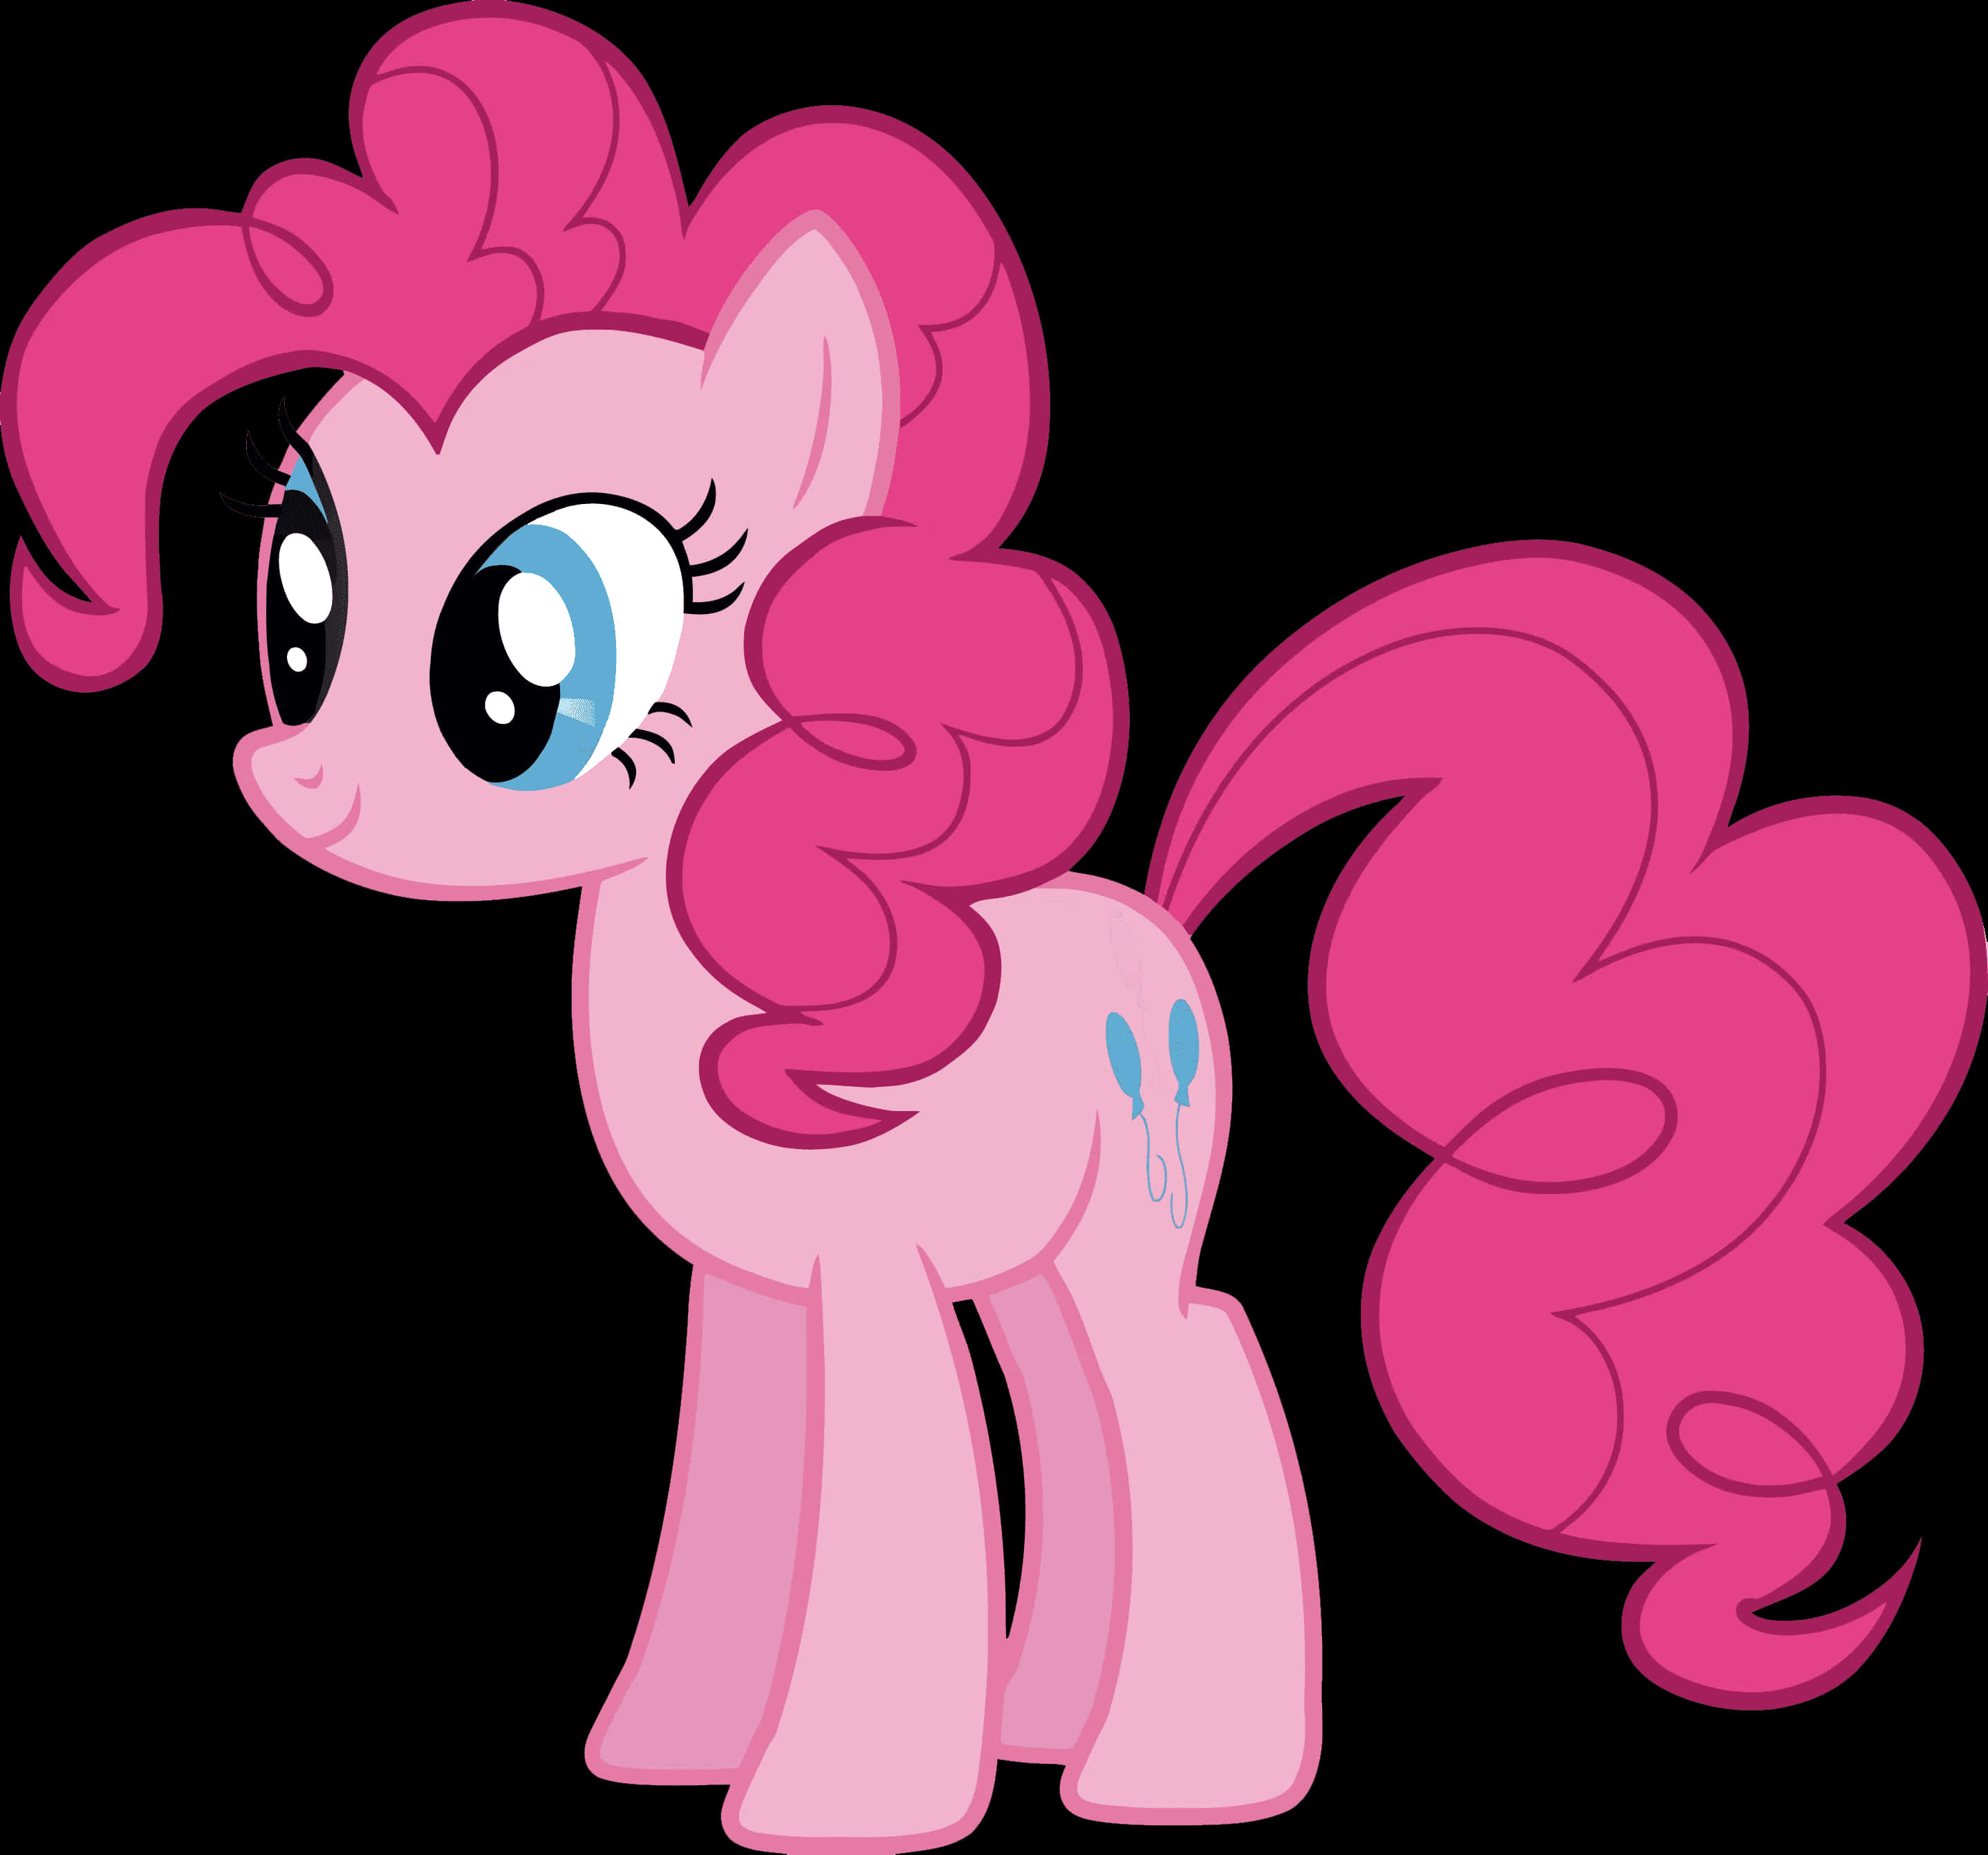 Pinkie Pie My Little Pony Vector PNG image